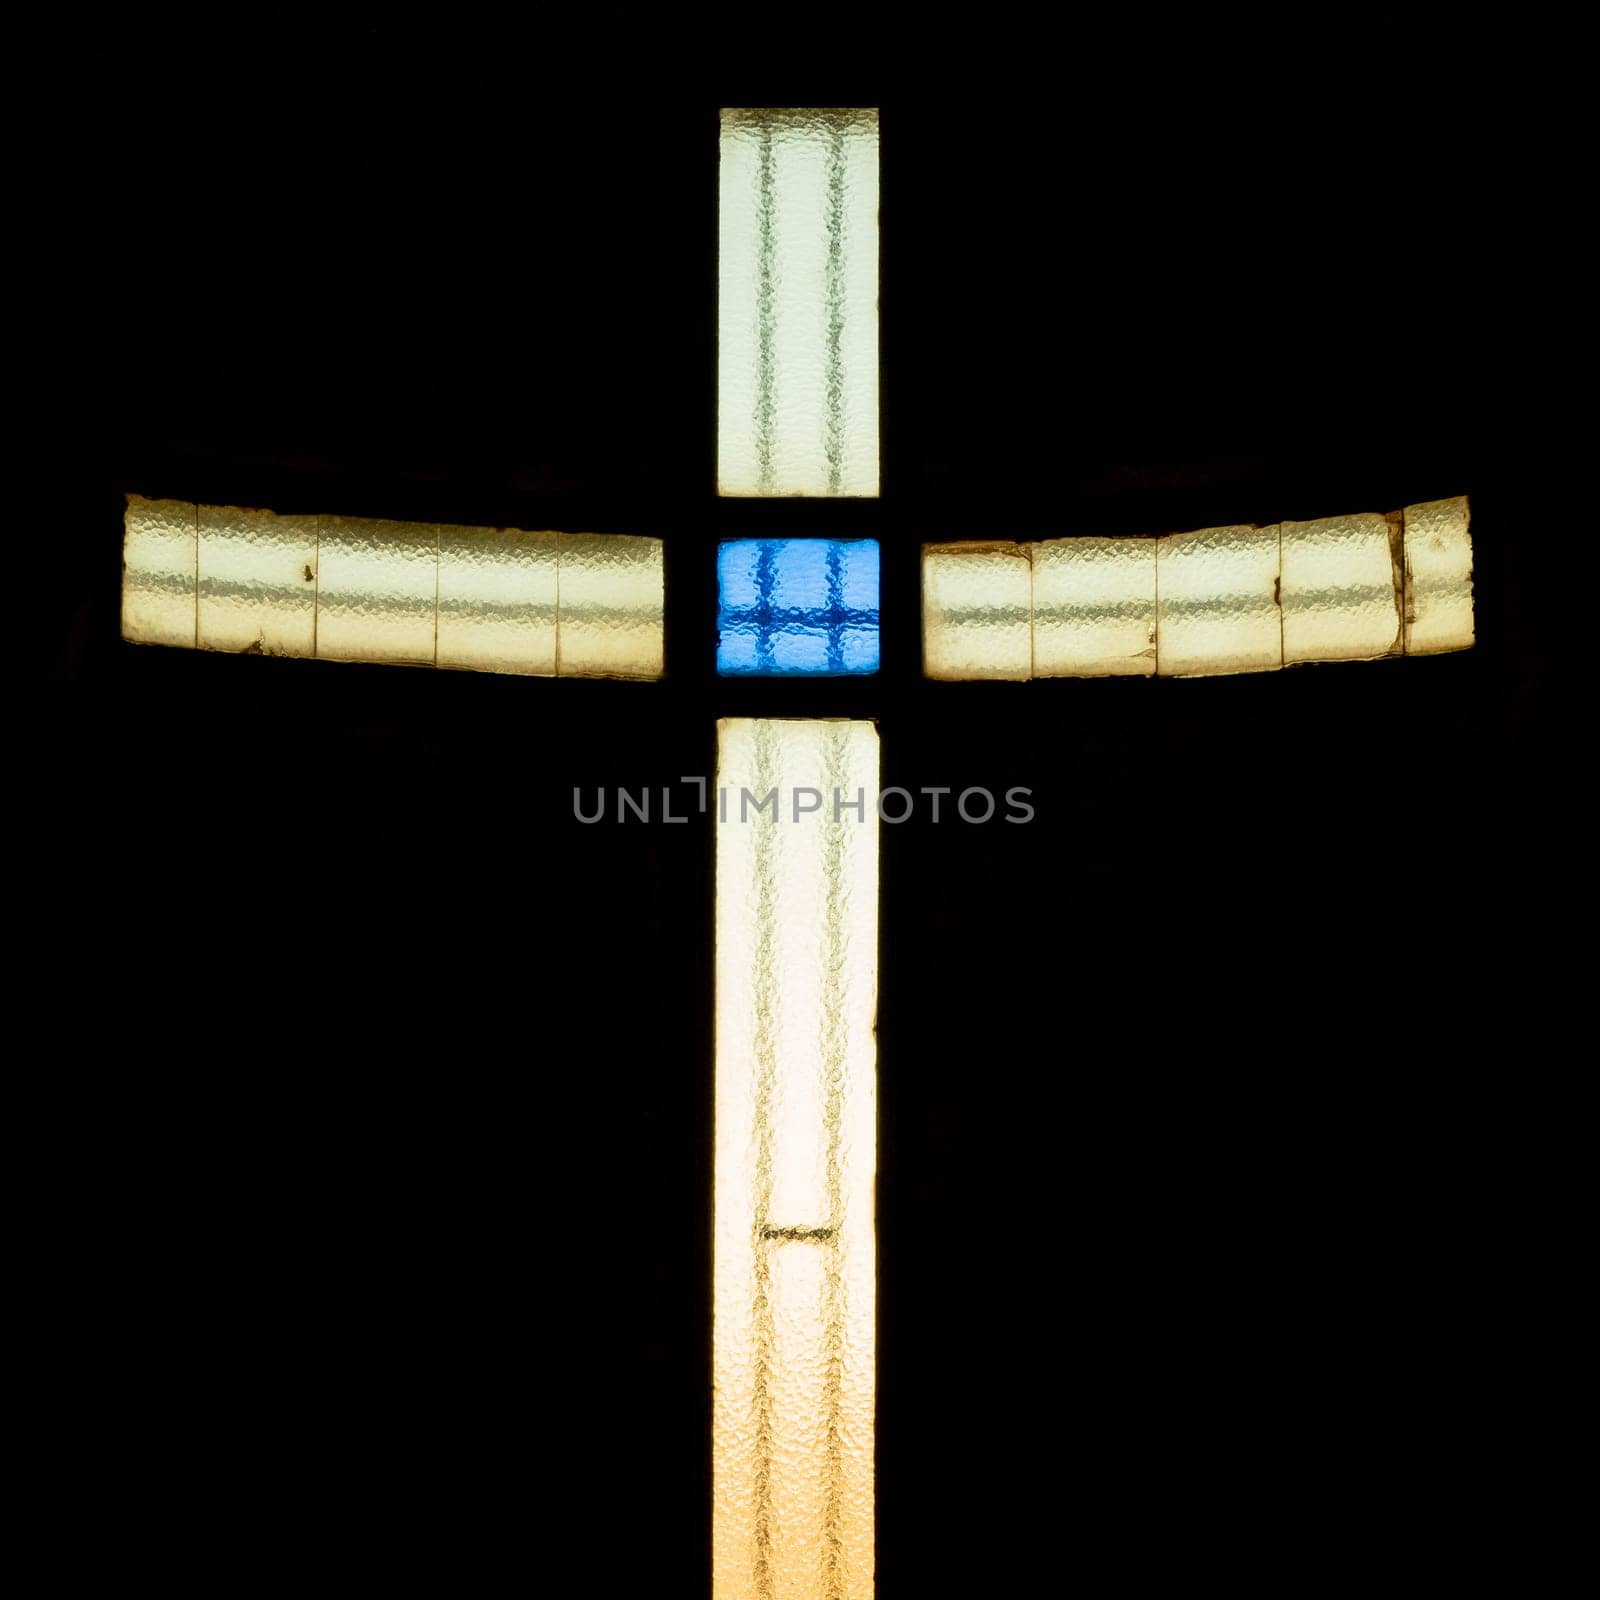 Stained glass cross by germanopoli